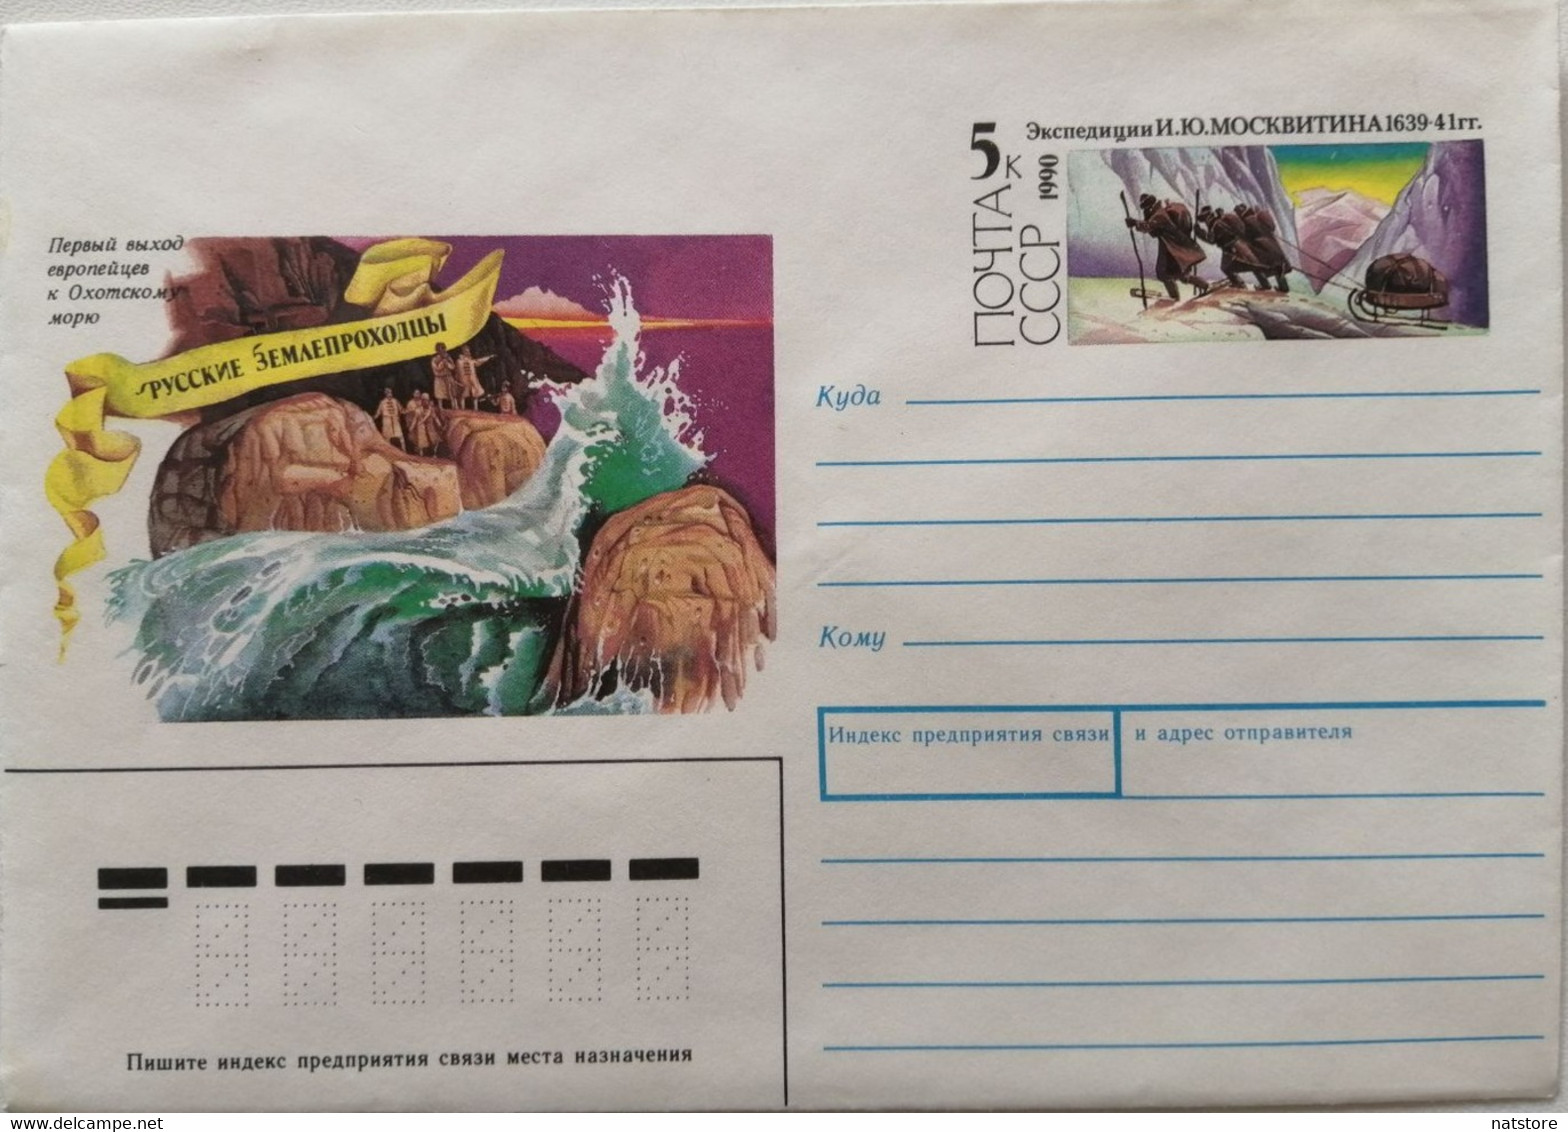 1990..USSR..  COVER WITH STAMP ..THE FIRST EXIT OF EUROPEANS TO THE SEA OF OKHOTSK..I.Y.MOSKVITIN EXPEDITION.. NEW!!! - Explorateurs & Célébrités Polaires